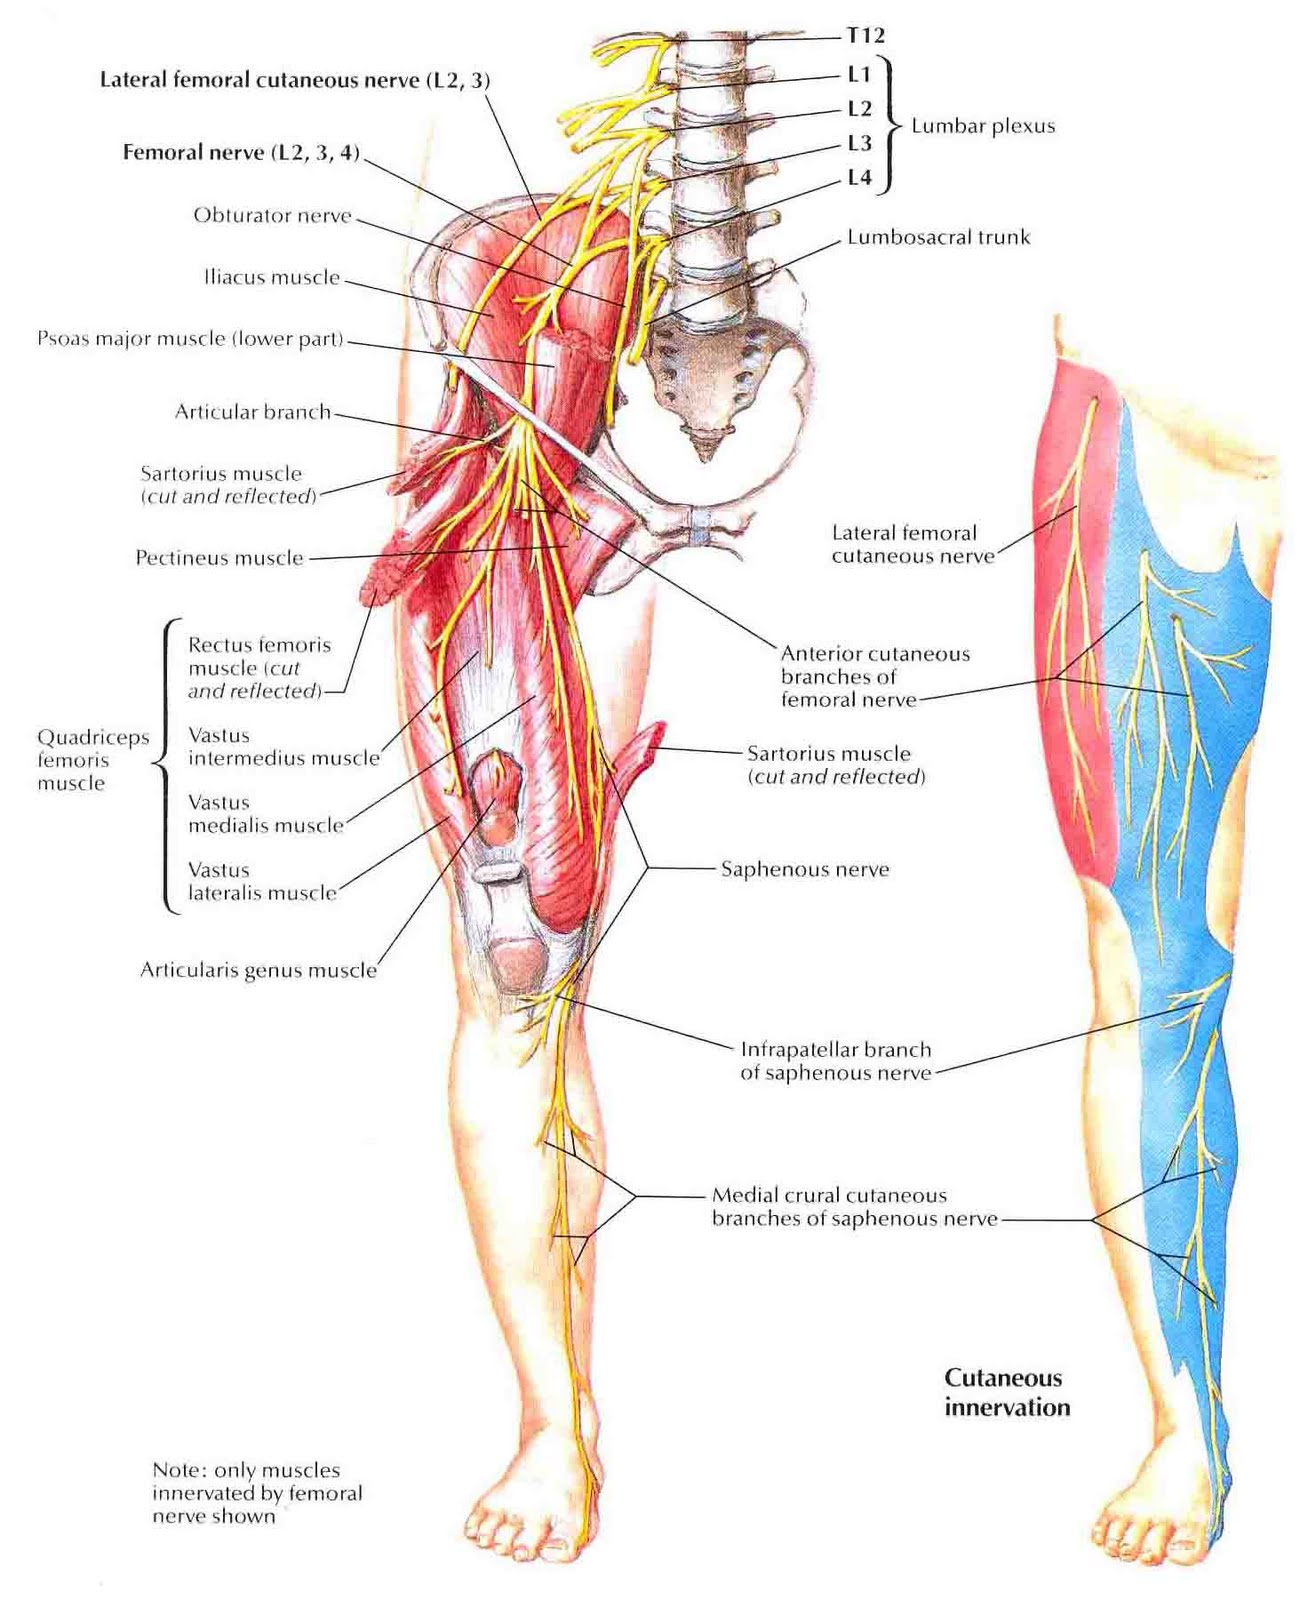 Anatomical location of the femoral nerve (source)